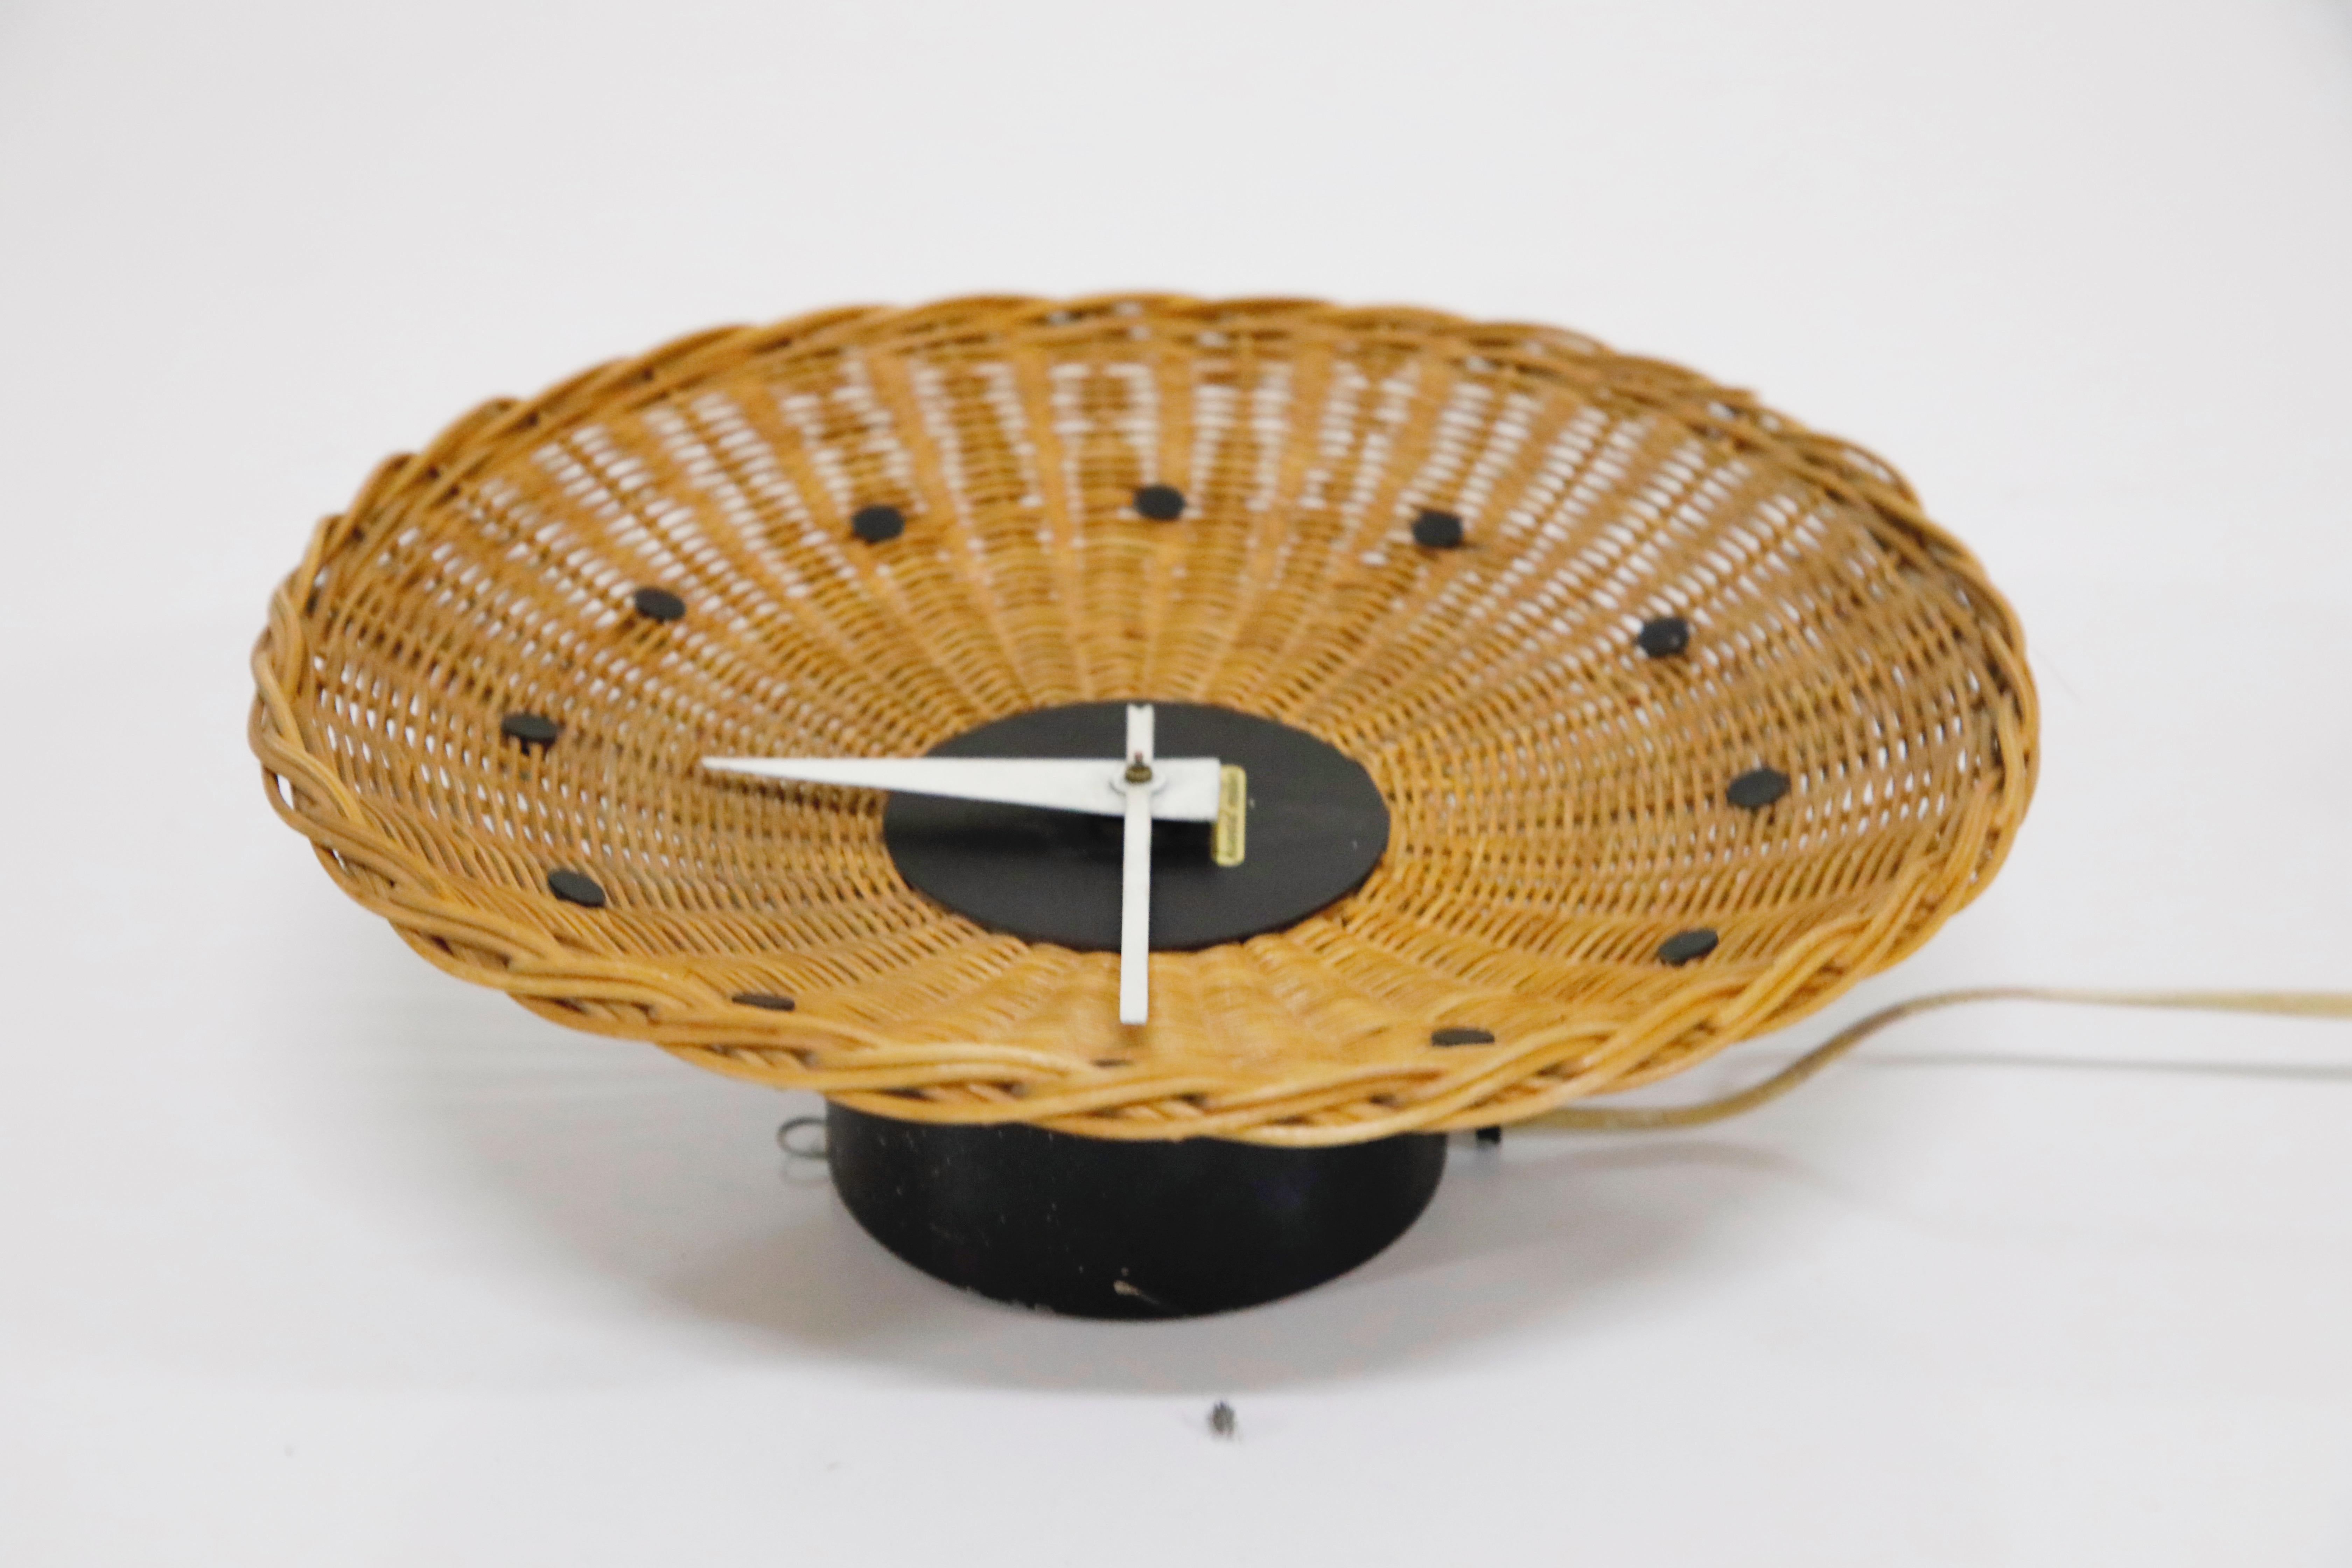 American Woven Rattan 'Basket Clock' by George Nelson for Howard Miller, 1950s, Rare